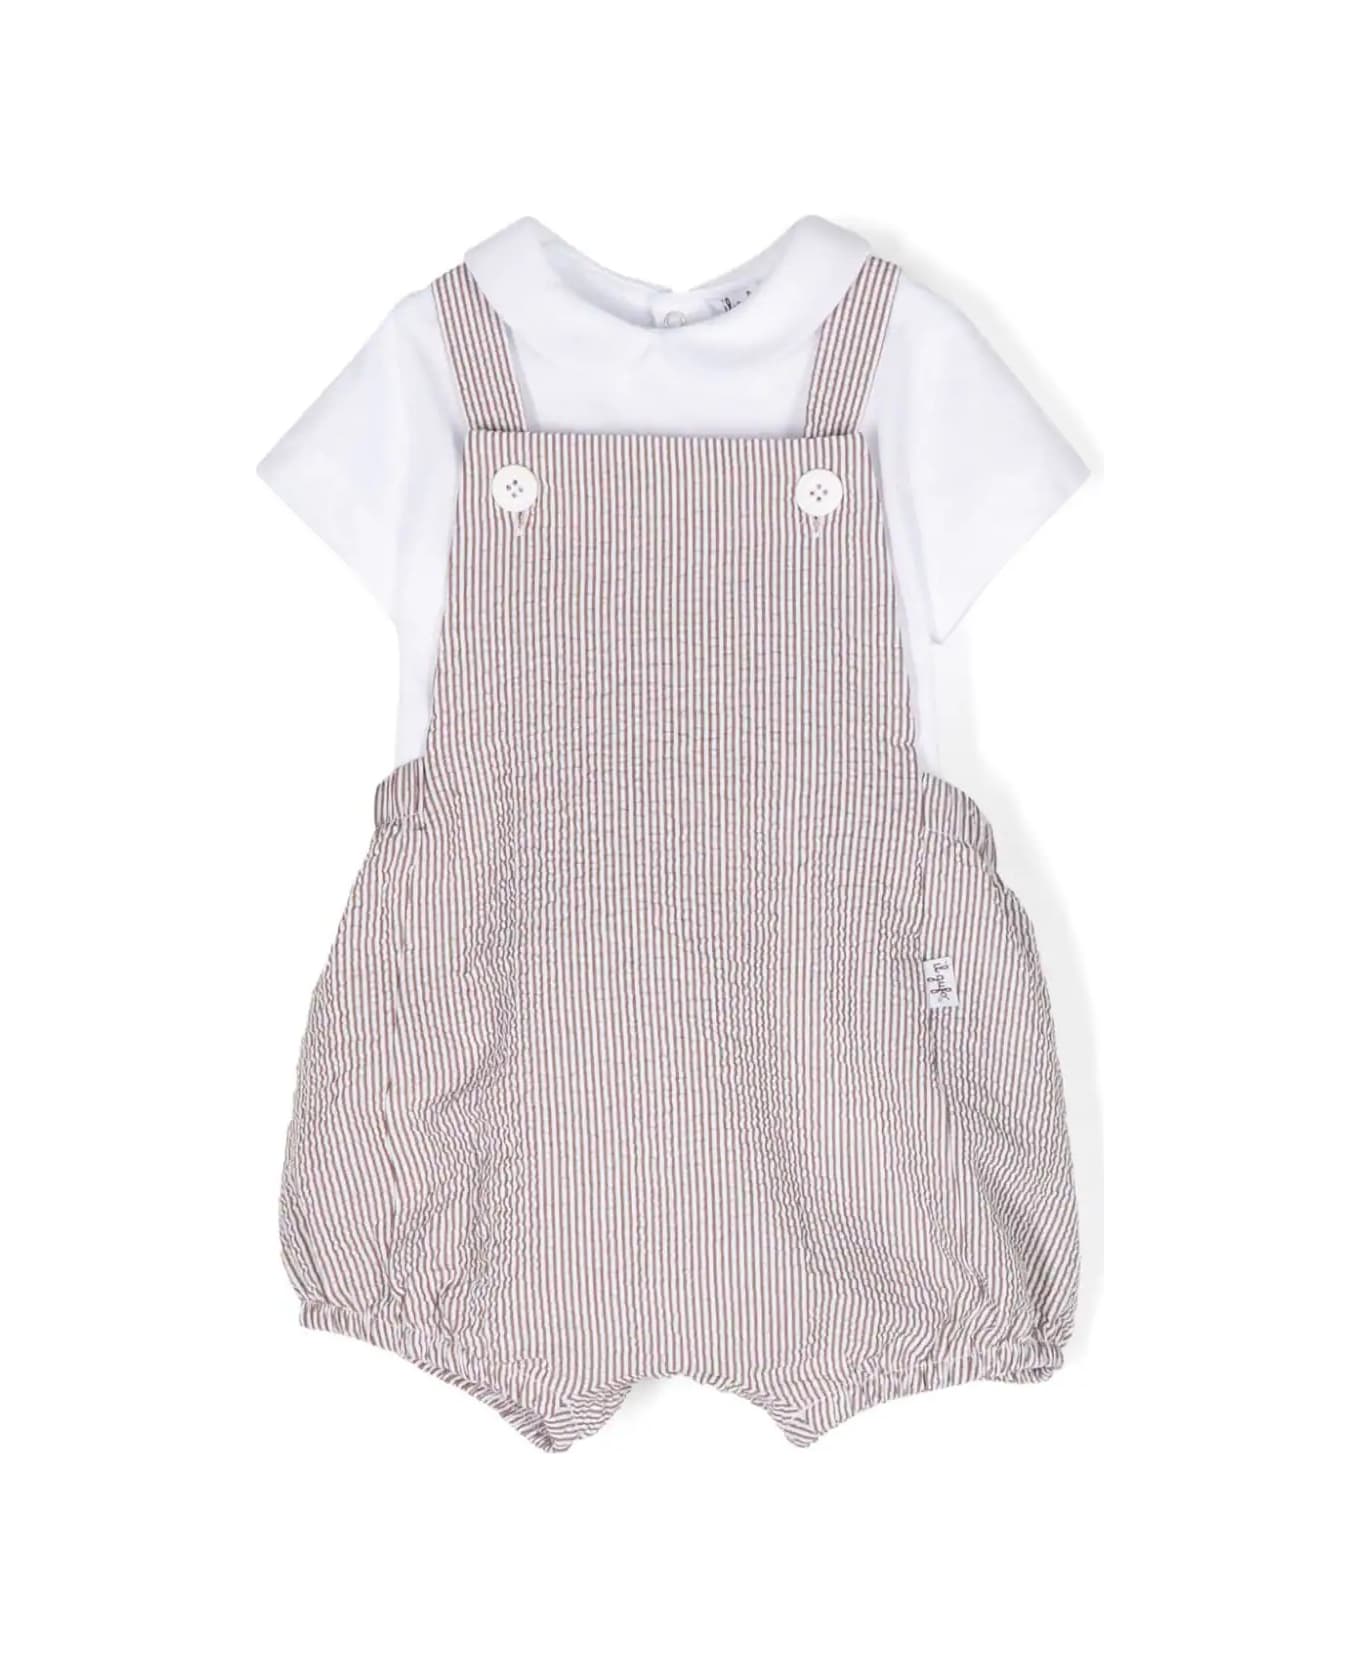 Il Gufo White And Brown Two Piece Set With Seersucker Dungarees - White